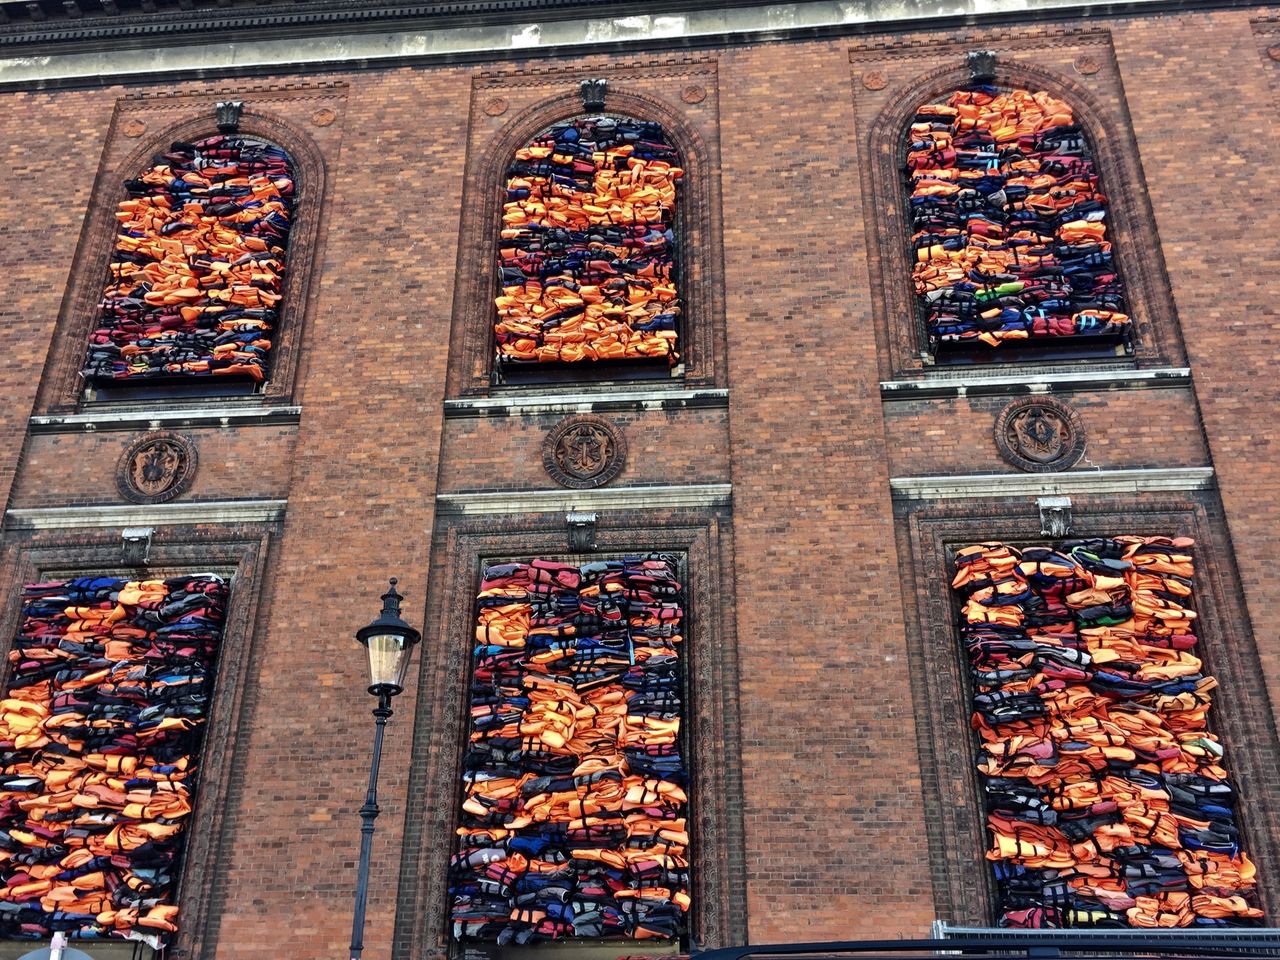 Lifejackets filling the windows of an old building.